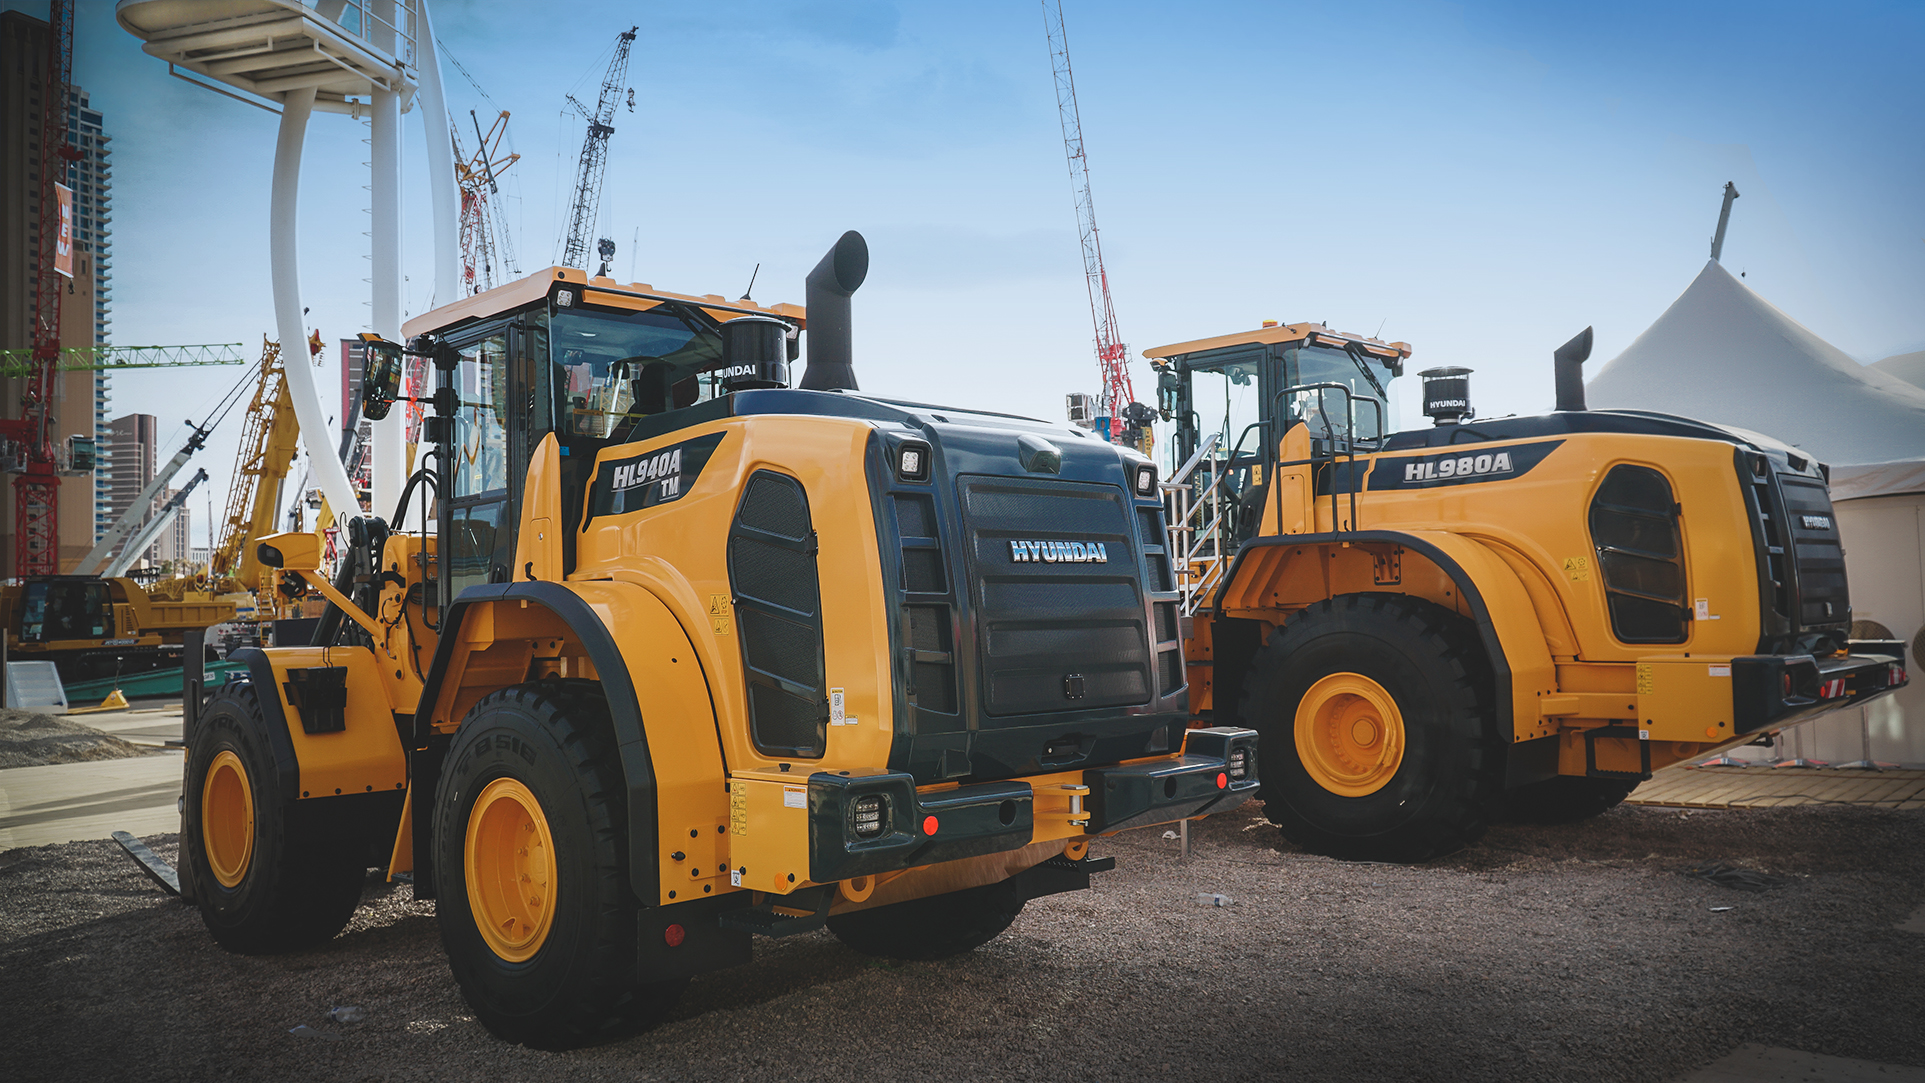 - Loaders, Hyundai Adds Hyundai Wheel CVT At Americas, Series HL930A, ConExpo-Con/Agg HL975 Equipment Smaller Construction Introduces to Model Launches A